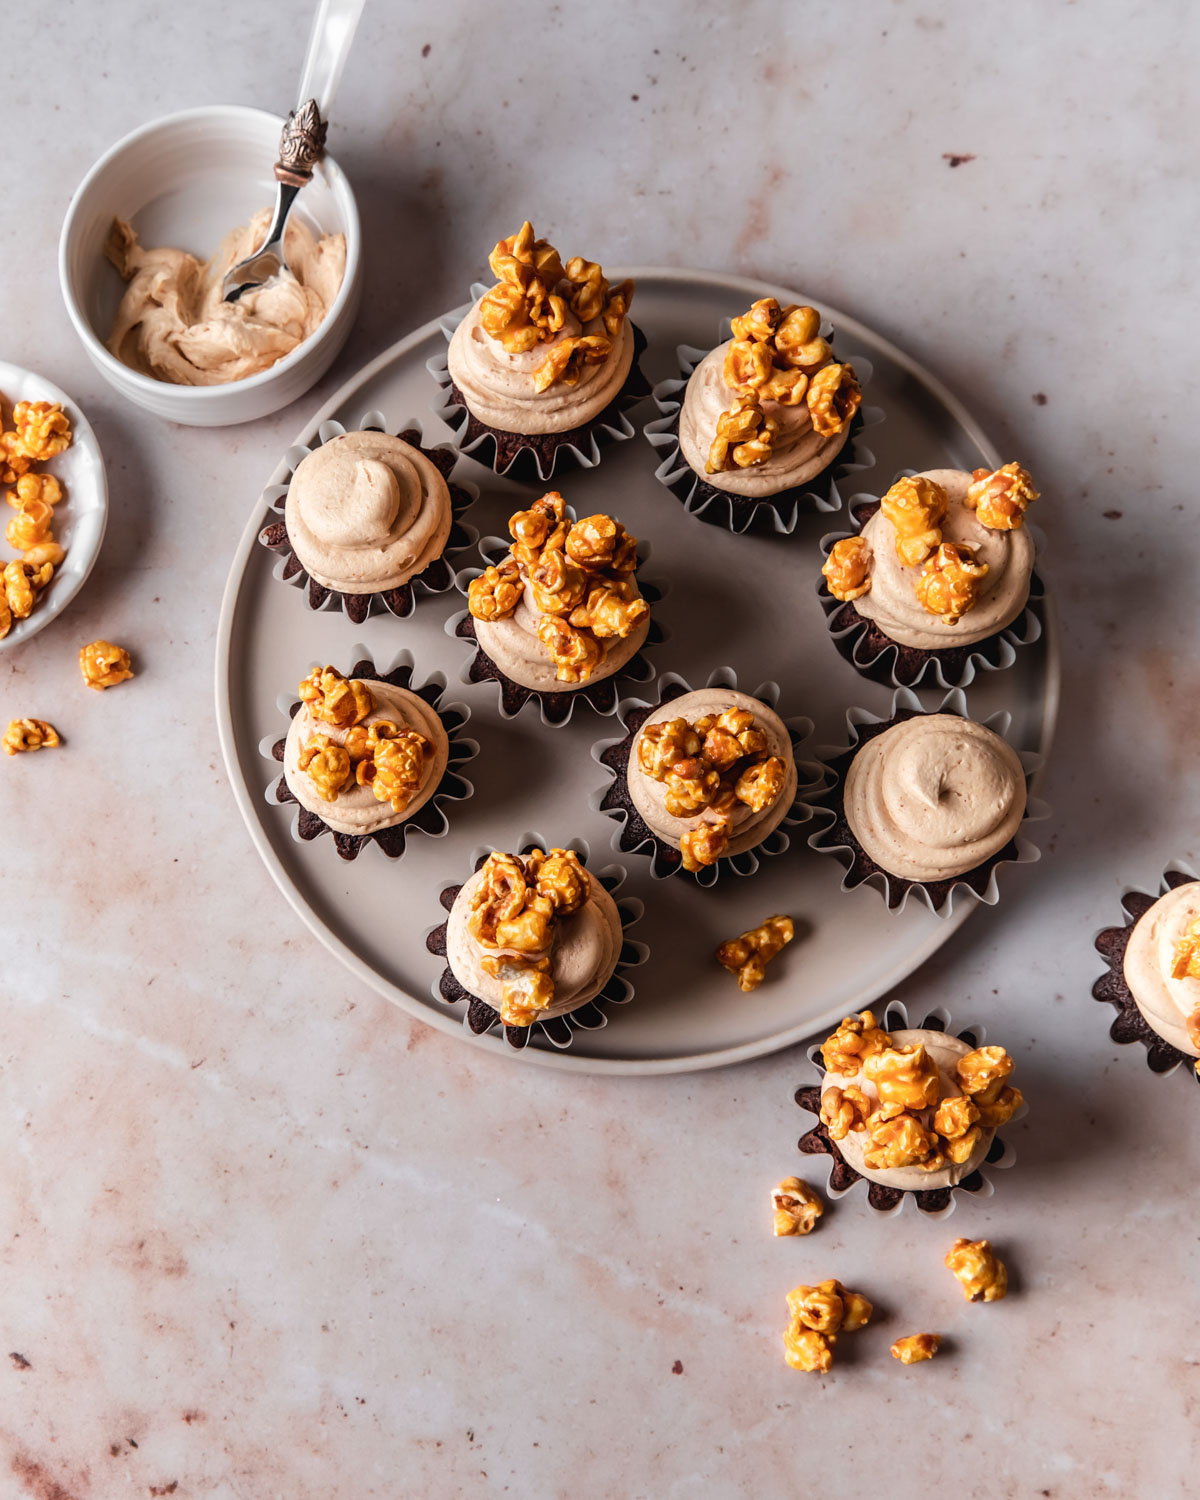 A platter of chocolate cupcakes with swirls of peanut butter frosting on top and caramel popcorn